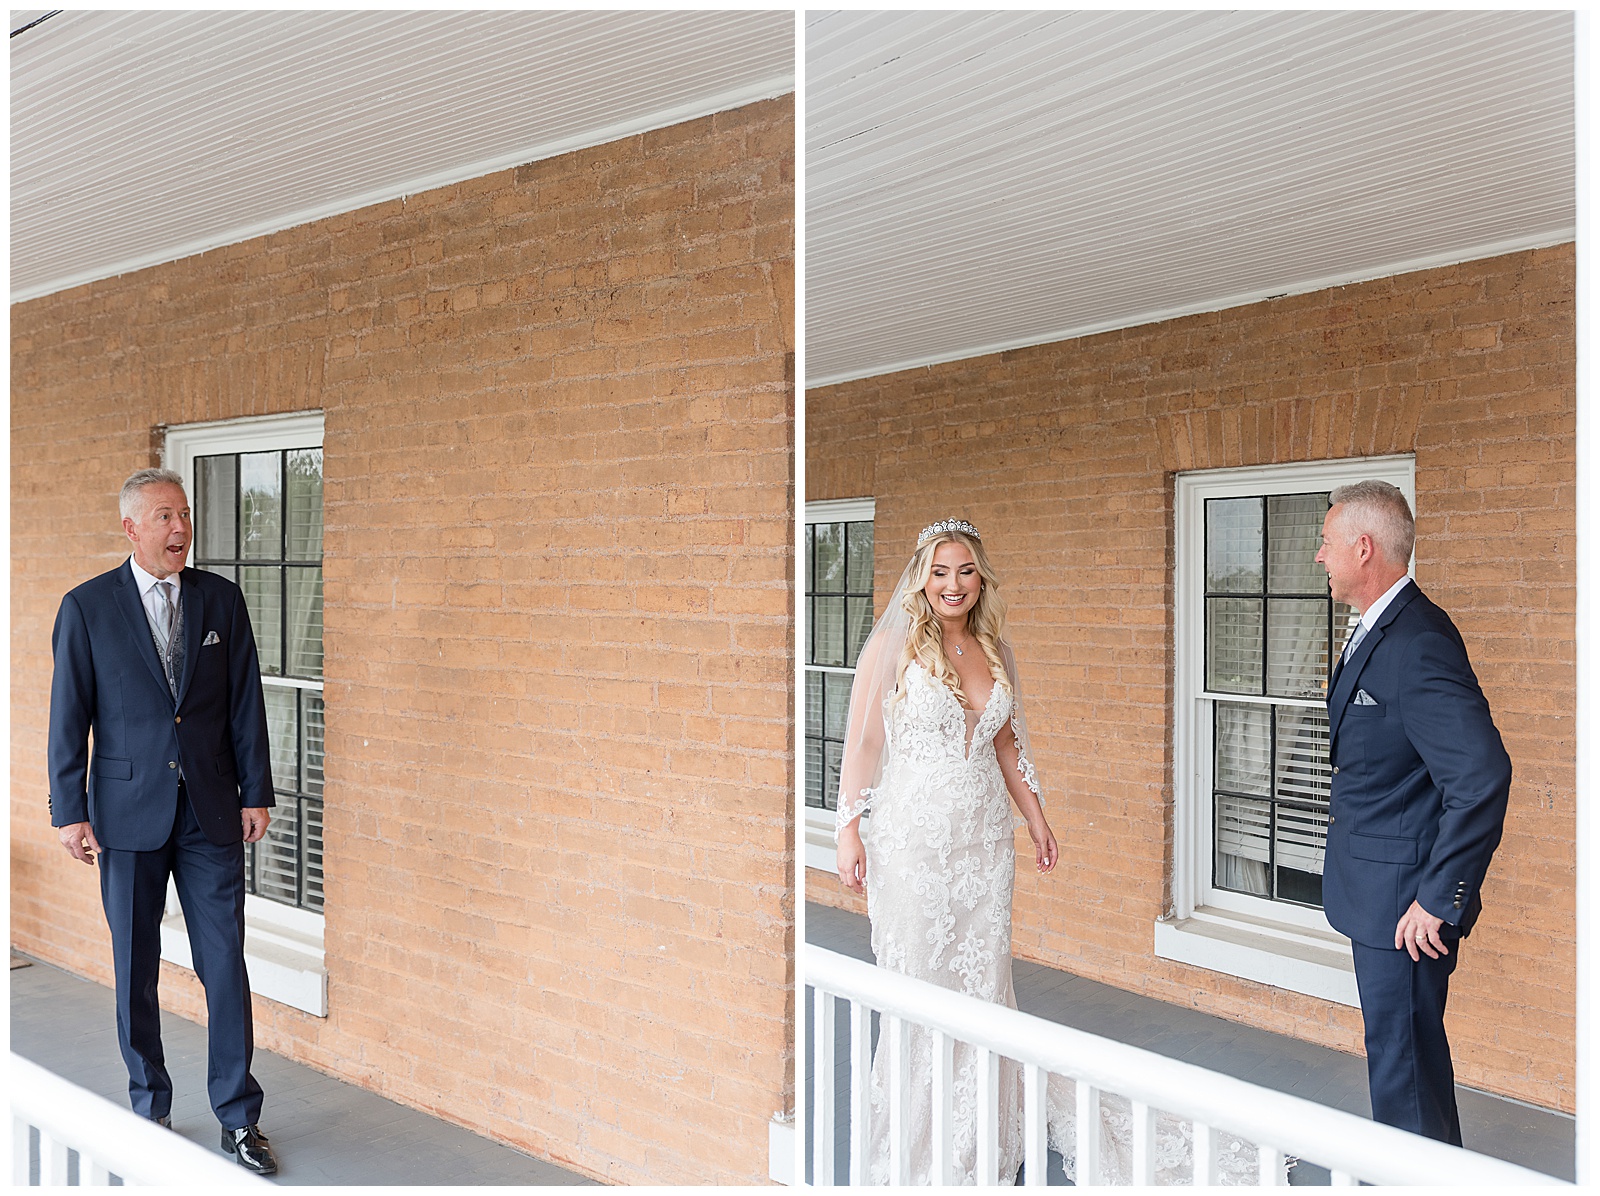 first look moment between bride and her father along light colored brick wall and white fence on bright day